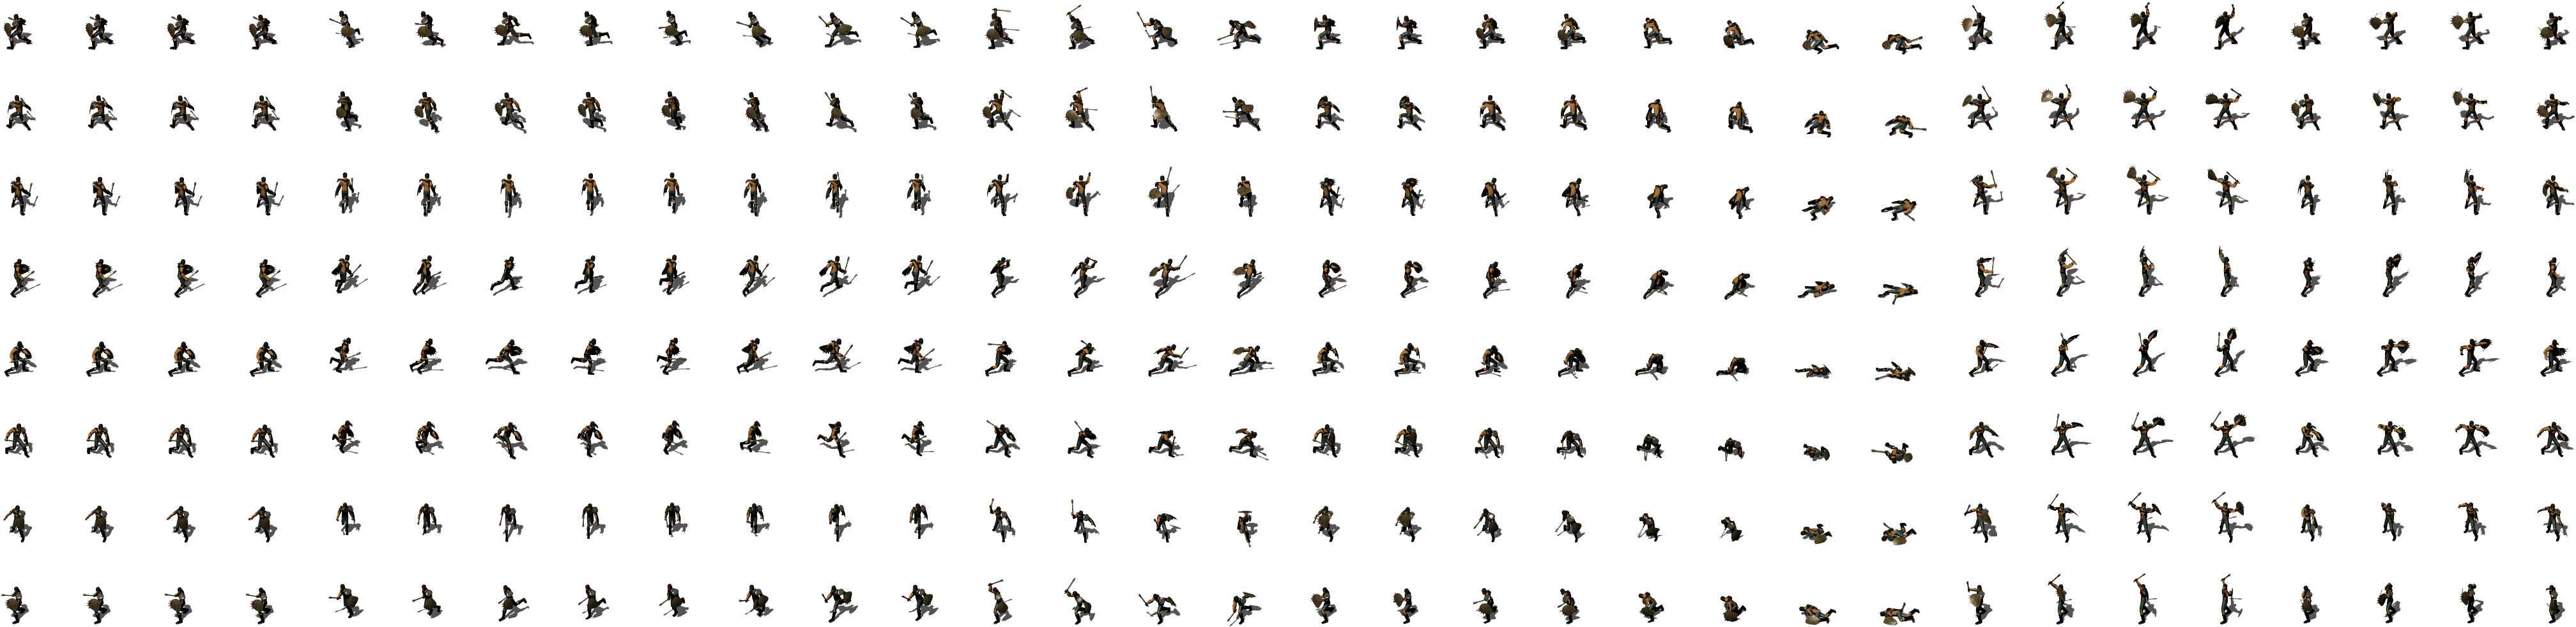 Orc Heavy 1 - Open Game Art Sprite Sheet (4096x1024), Png Download